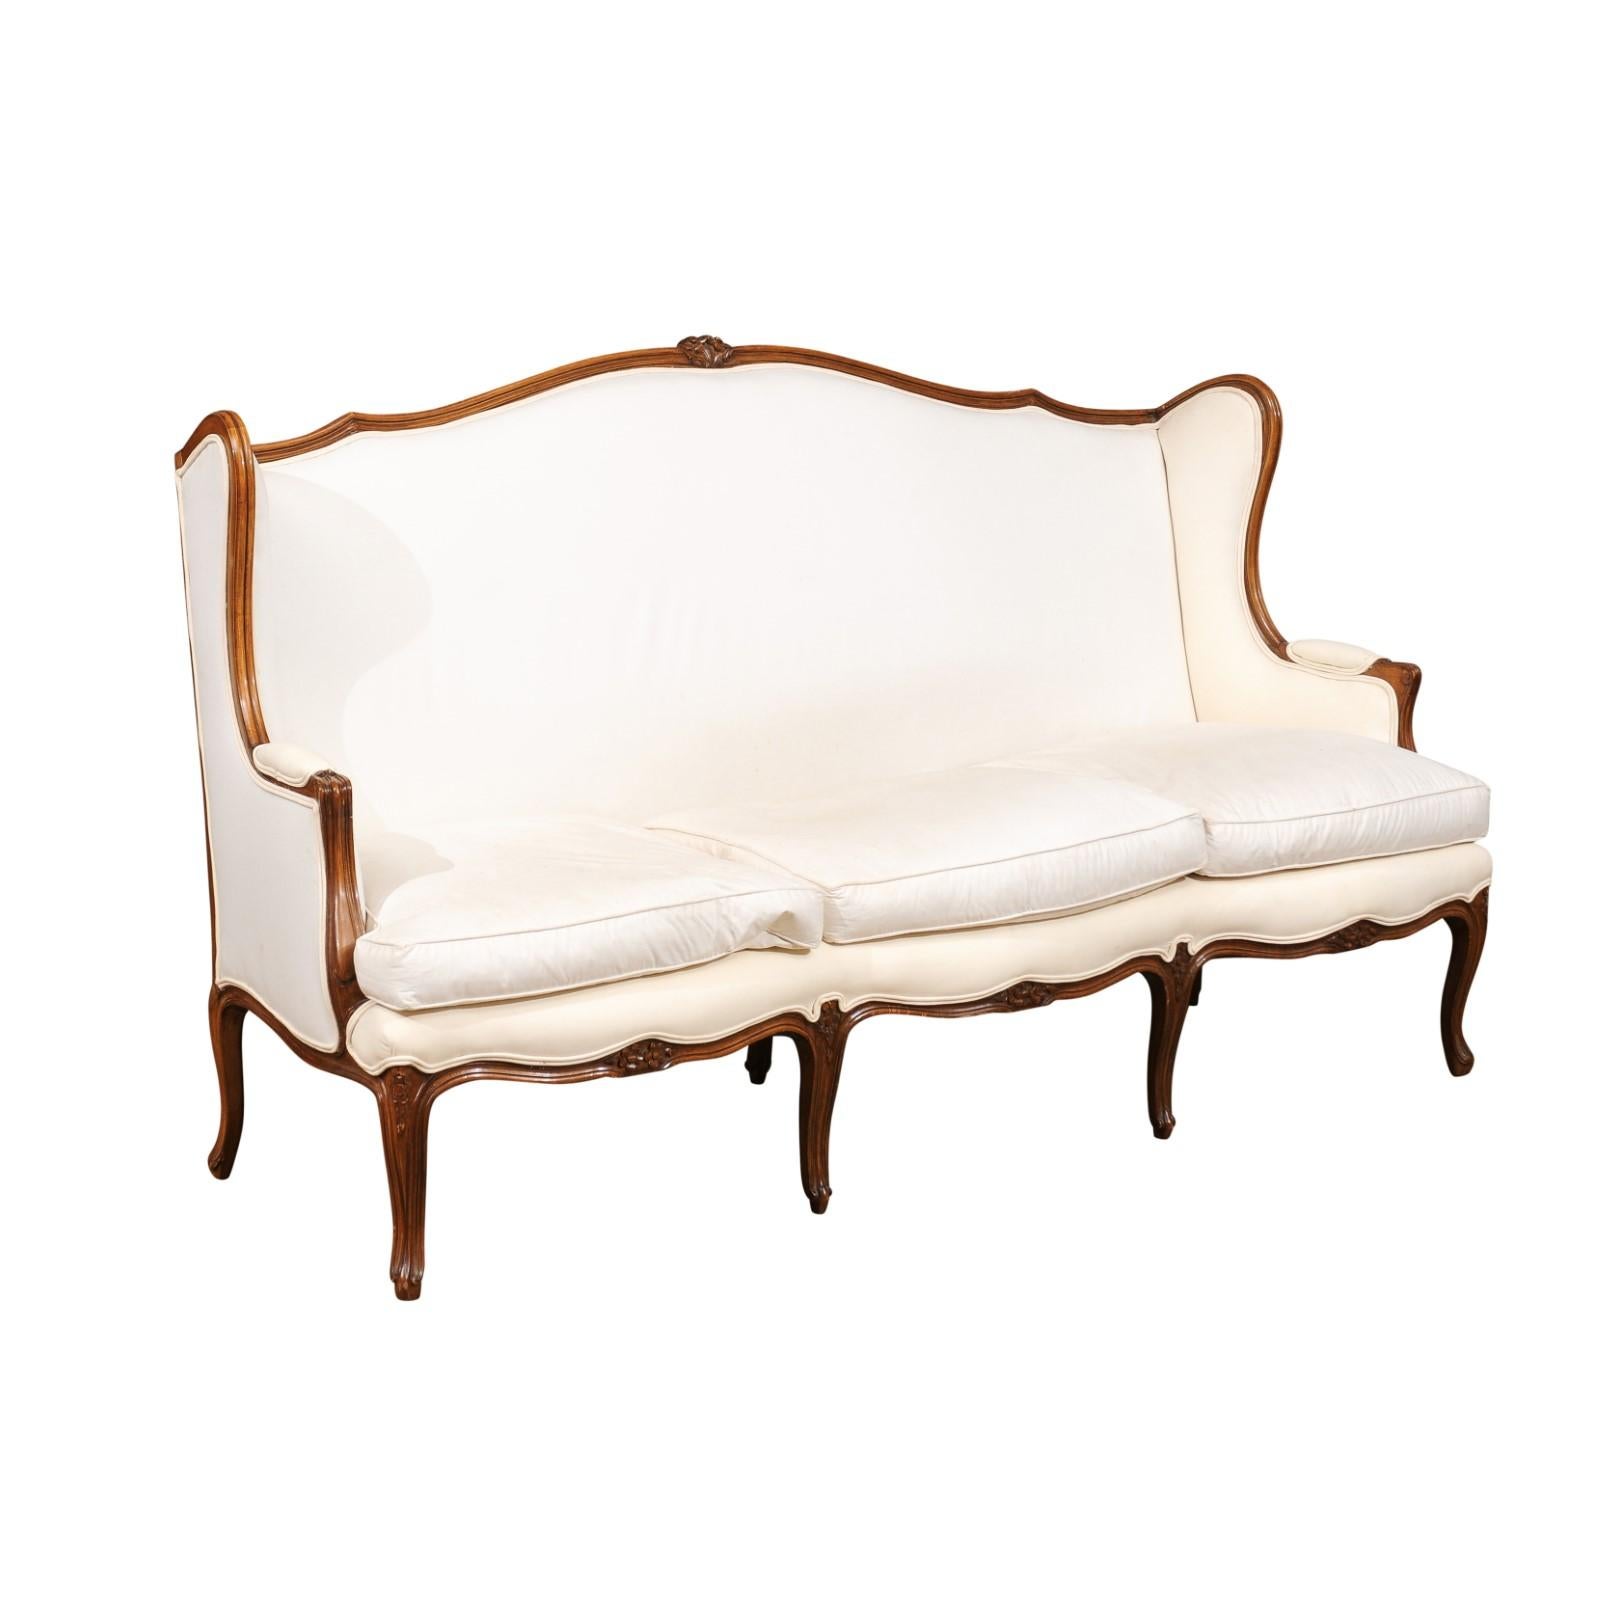 A French Louis XV style three-seat wooden winged sofa from the 19th century with carved crest, scrolled arms, cabriole legs and new upholstery. This French wooden canapé à oreilles features a delicately curved upper rail accented in its center with